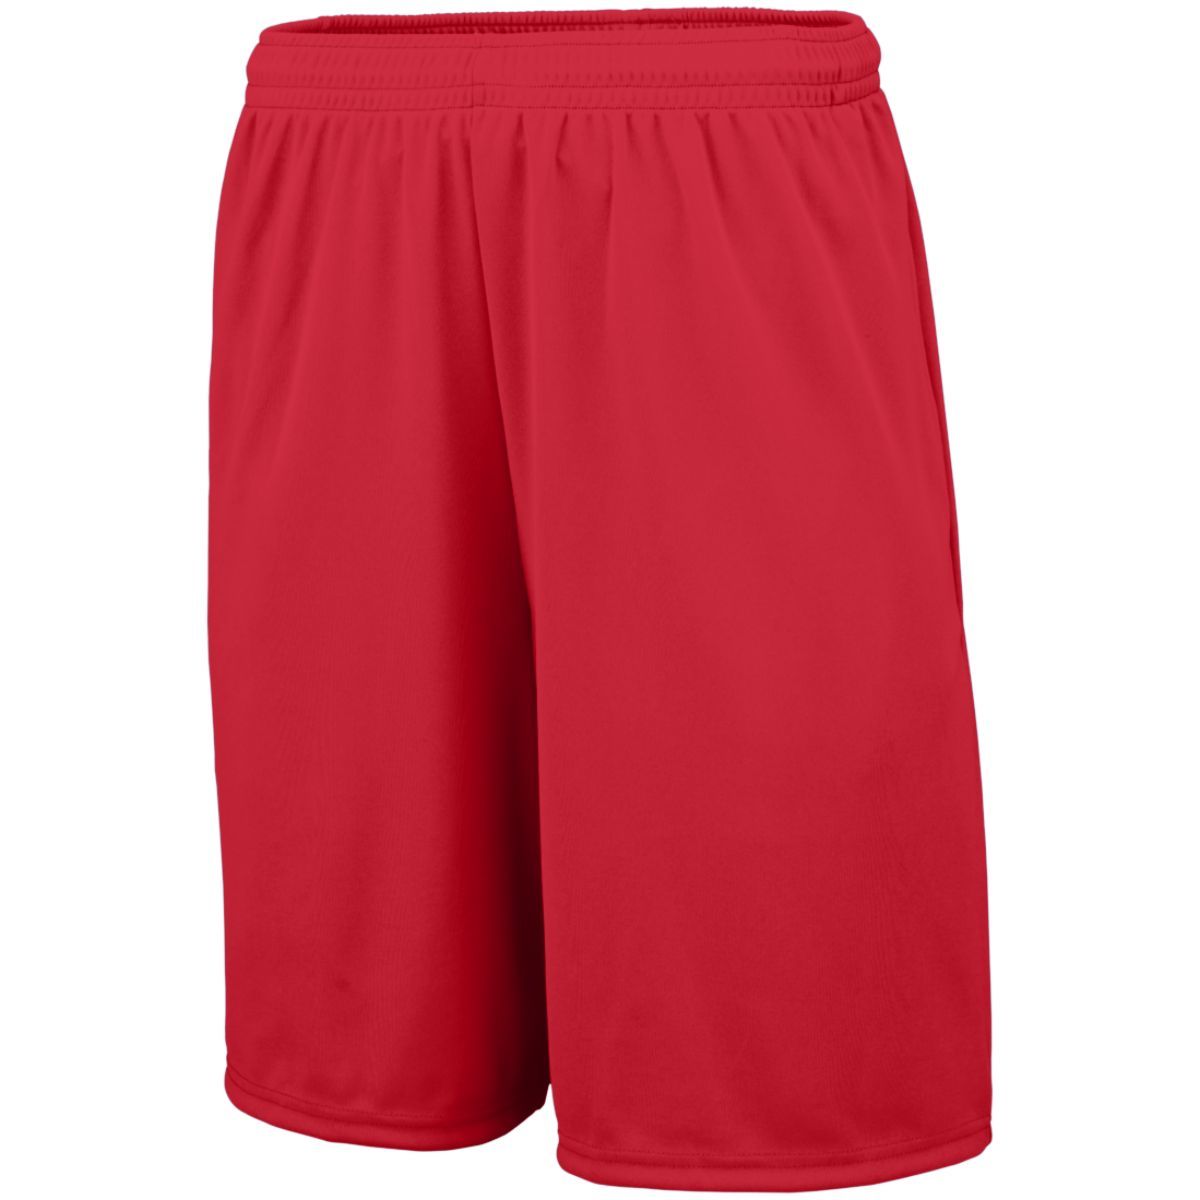 Augusta Sportswear Training Shorts With Pockets in Red  -Part of the Adult, Adult-Shorts, Augusta-Products, Lacrosse, All-Sports, All-Sports-1 product lines at KanaleyCreations.com